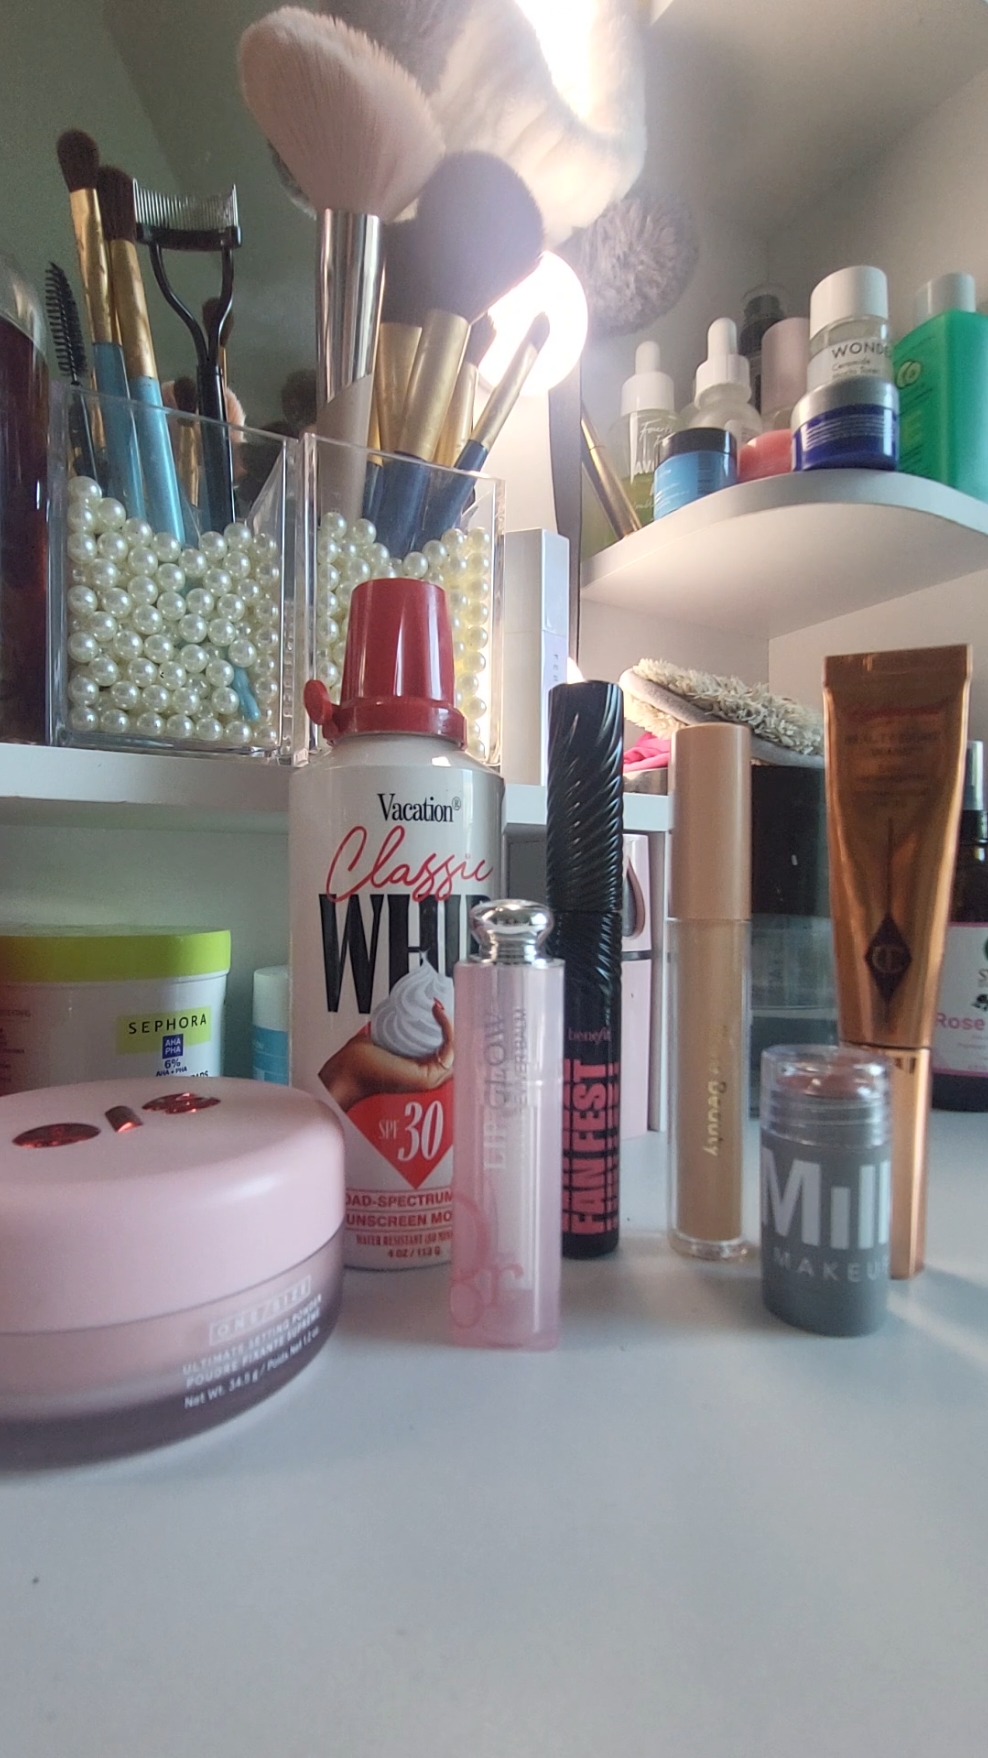 Don't get me wrong I still love drugstore but It feels so nice to use higher end 🙈 #virall #viraltiktok #skincareproducts #makeup #makeupchallenge #MakeupRoutine #grwm #Summer #cute #girly #fy #fyp #perfume #perfumetiktok #fypp #viralvideo #fypage #makeuproutine #drugstoremakeup #nyxcosmetics #elfcosmetics #sephora #dior #girls 